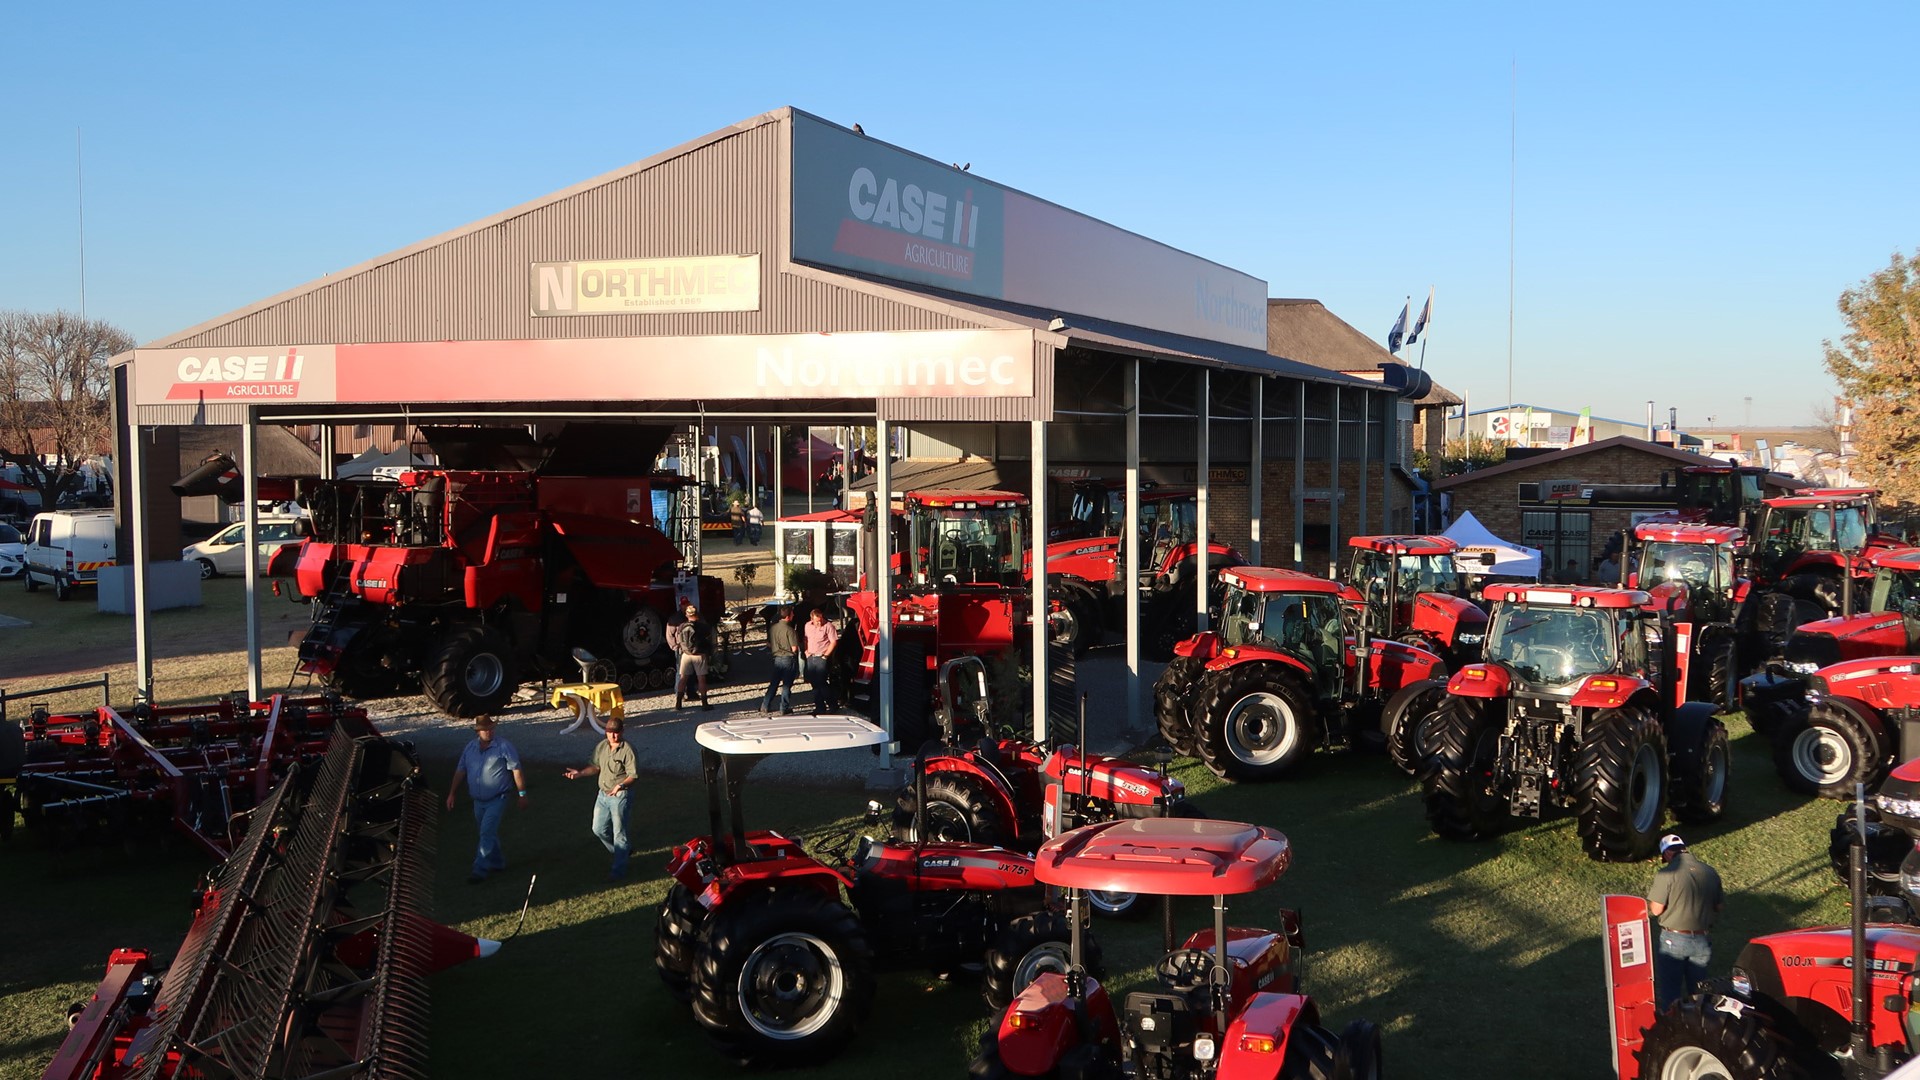 Case IH Stand at the NAMPO Show 2017